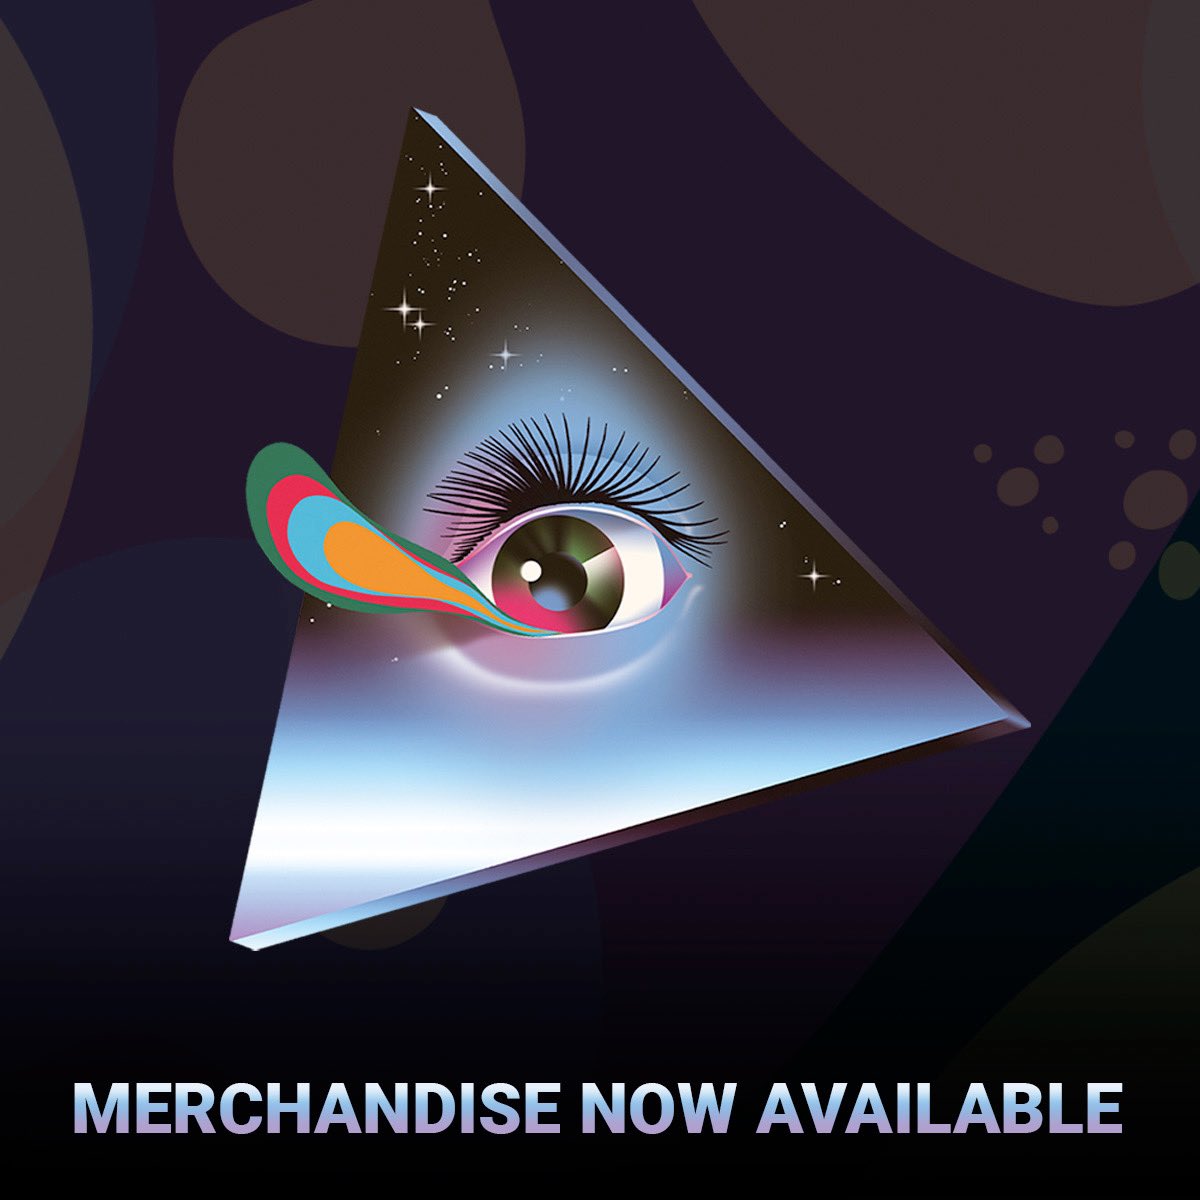 PN Merch Store is now available 👽 ➡️ …olo-nutini.nylonmerch.musicglue.store